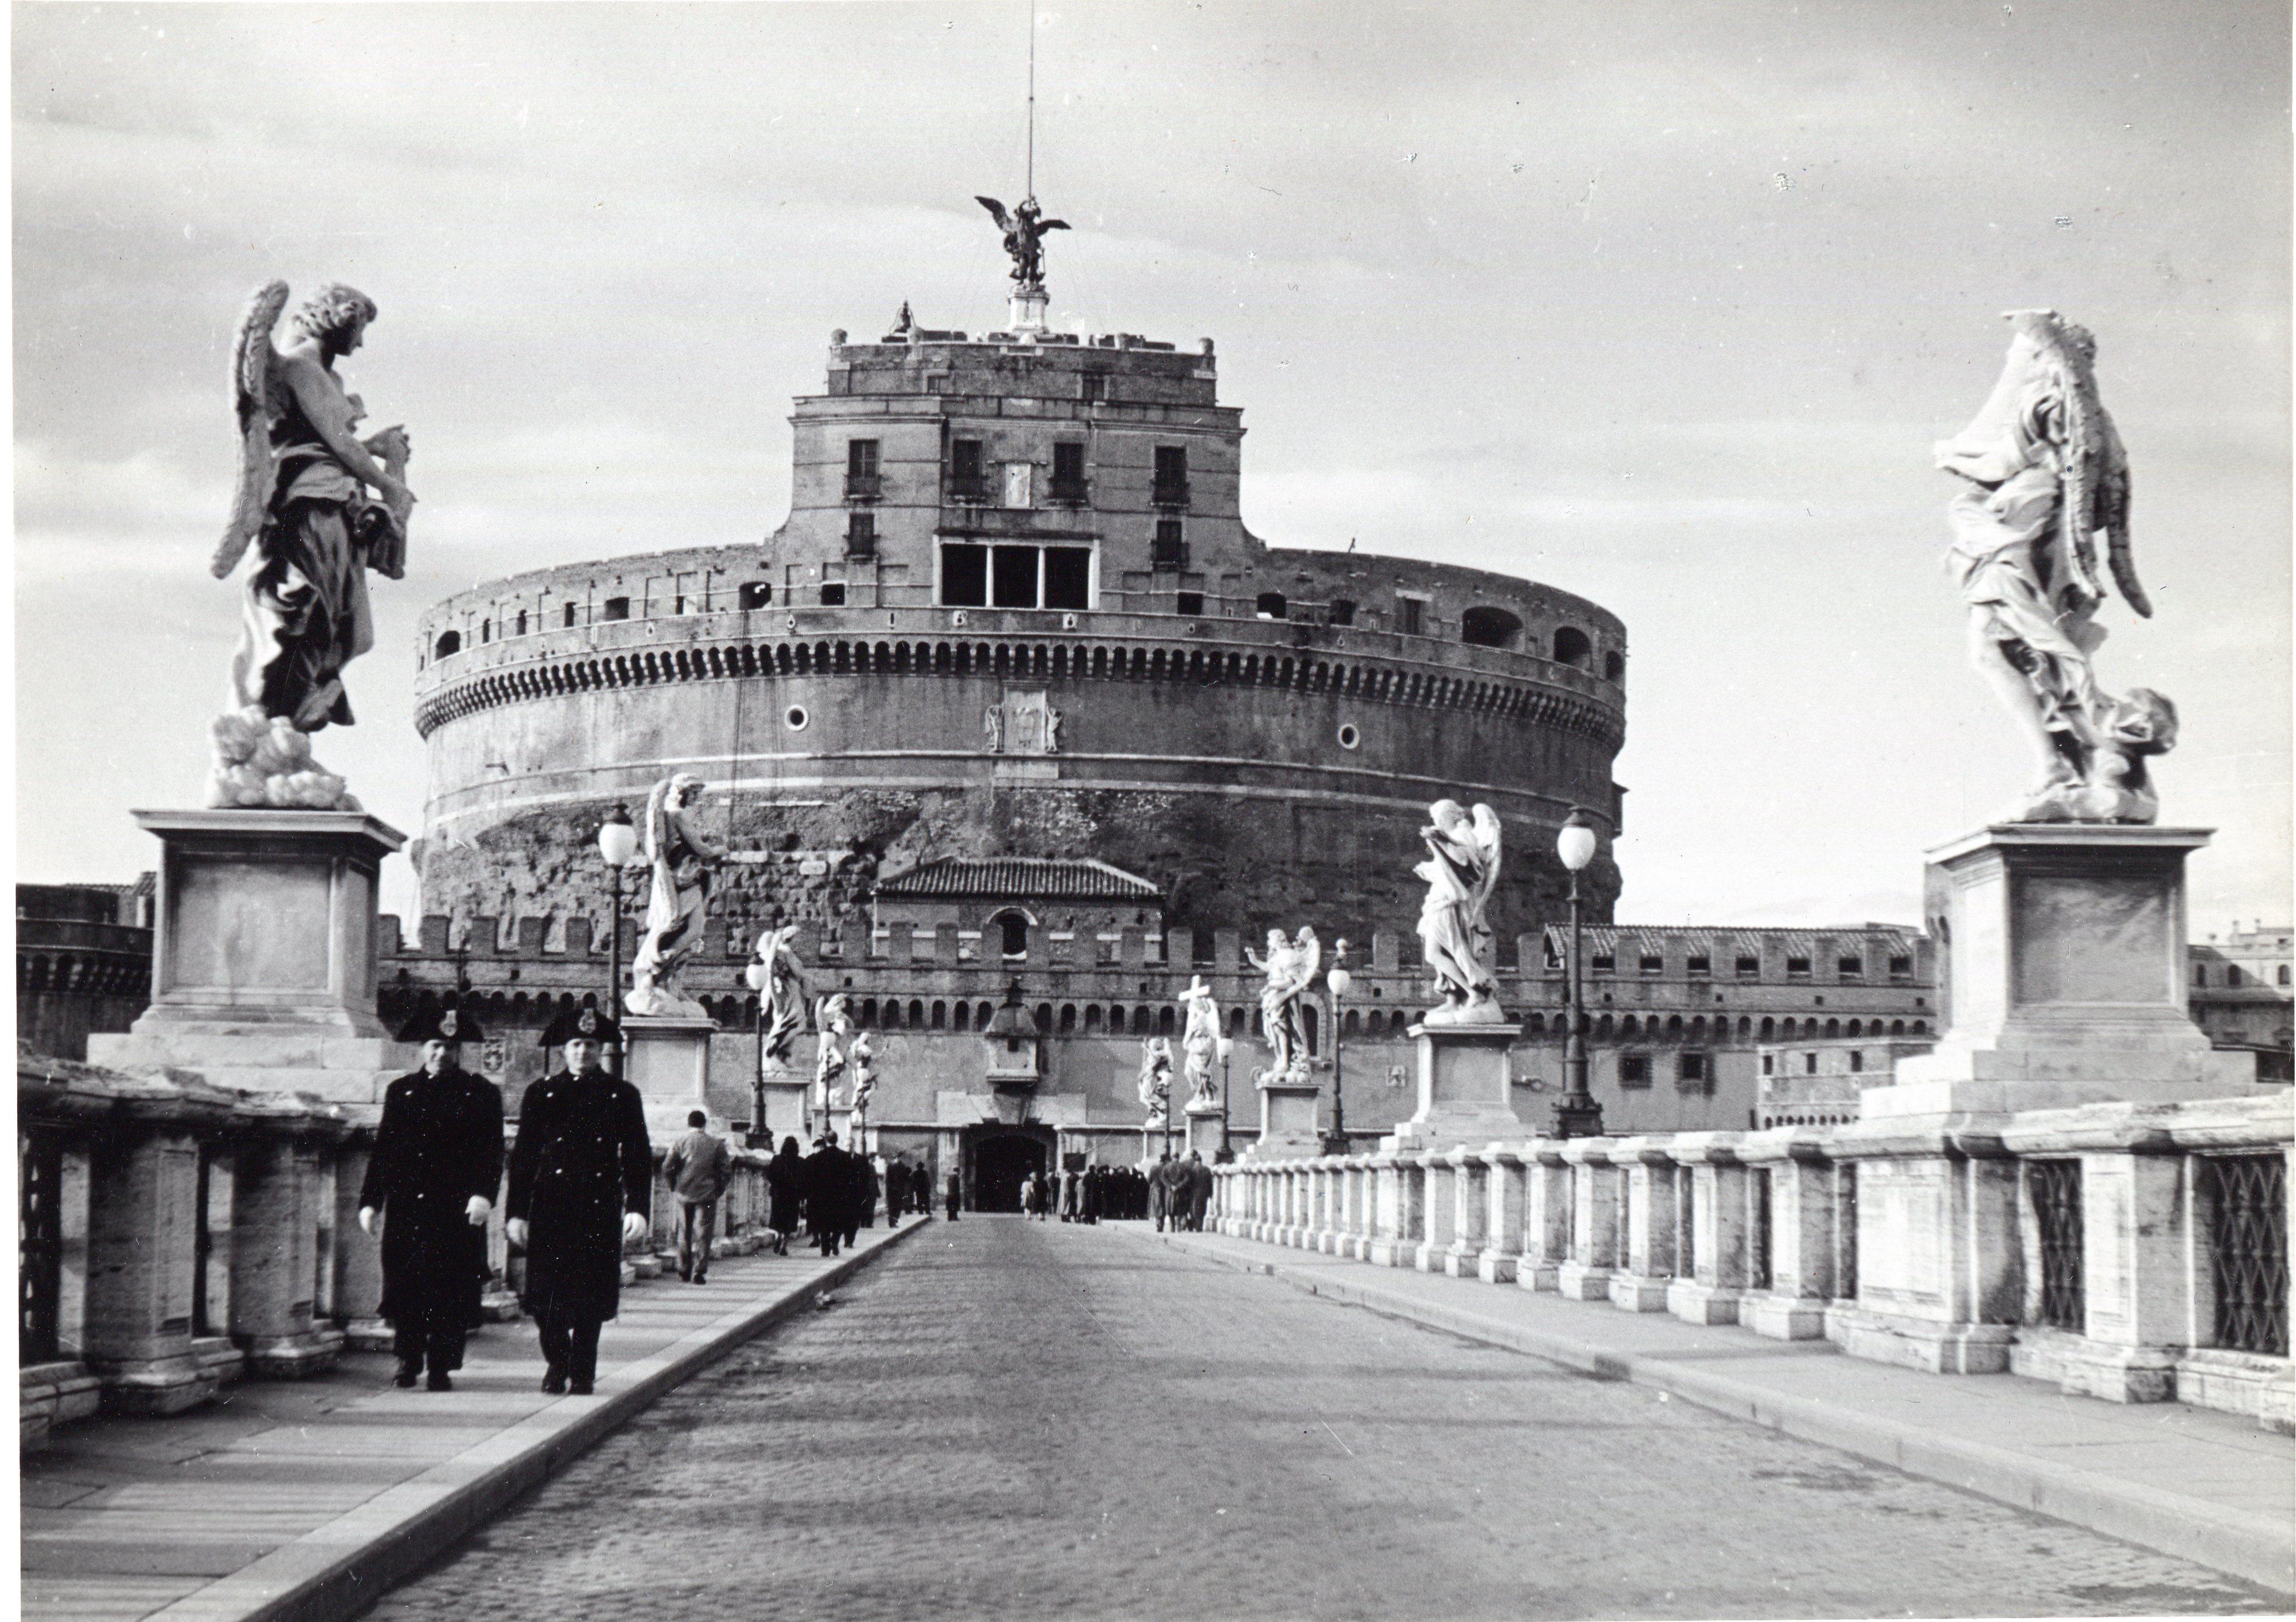 Erich Andres Black and White Photograph - Rome - Castel Sant' Angelo 1954